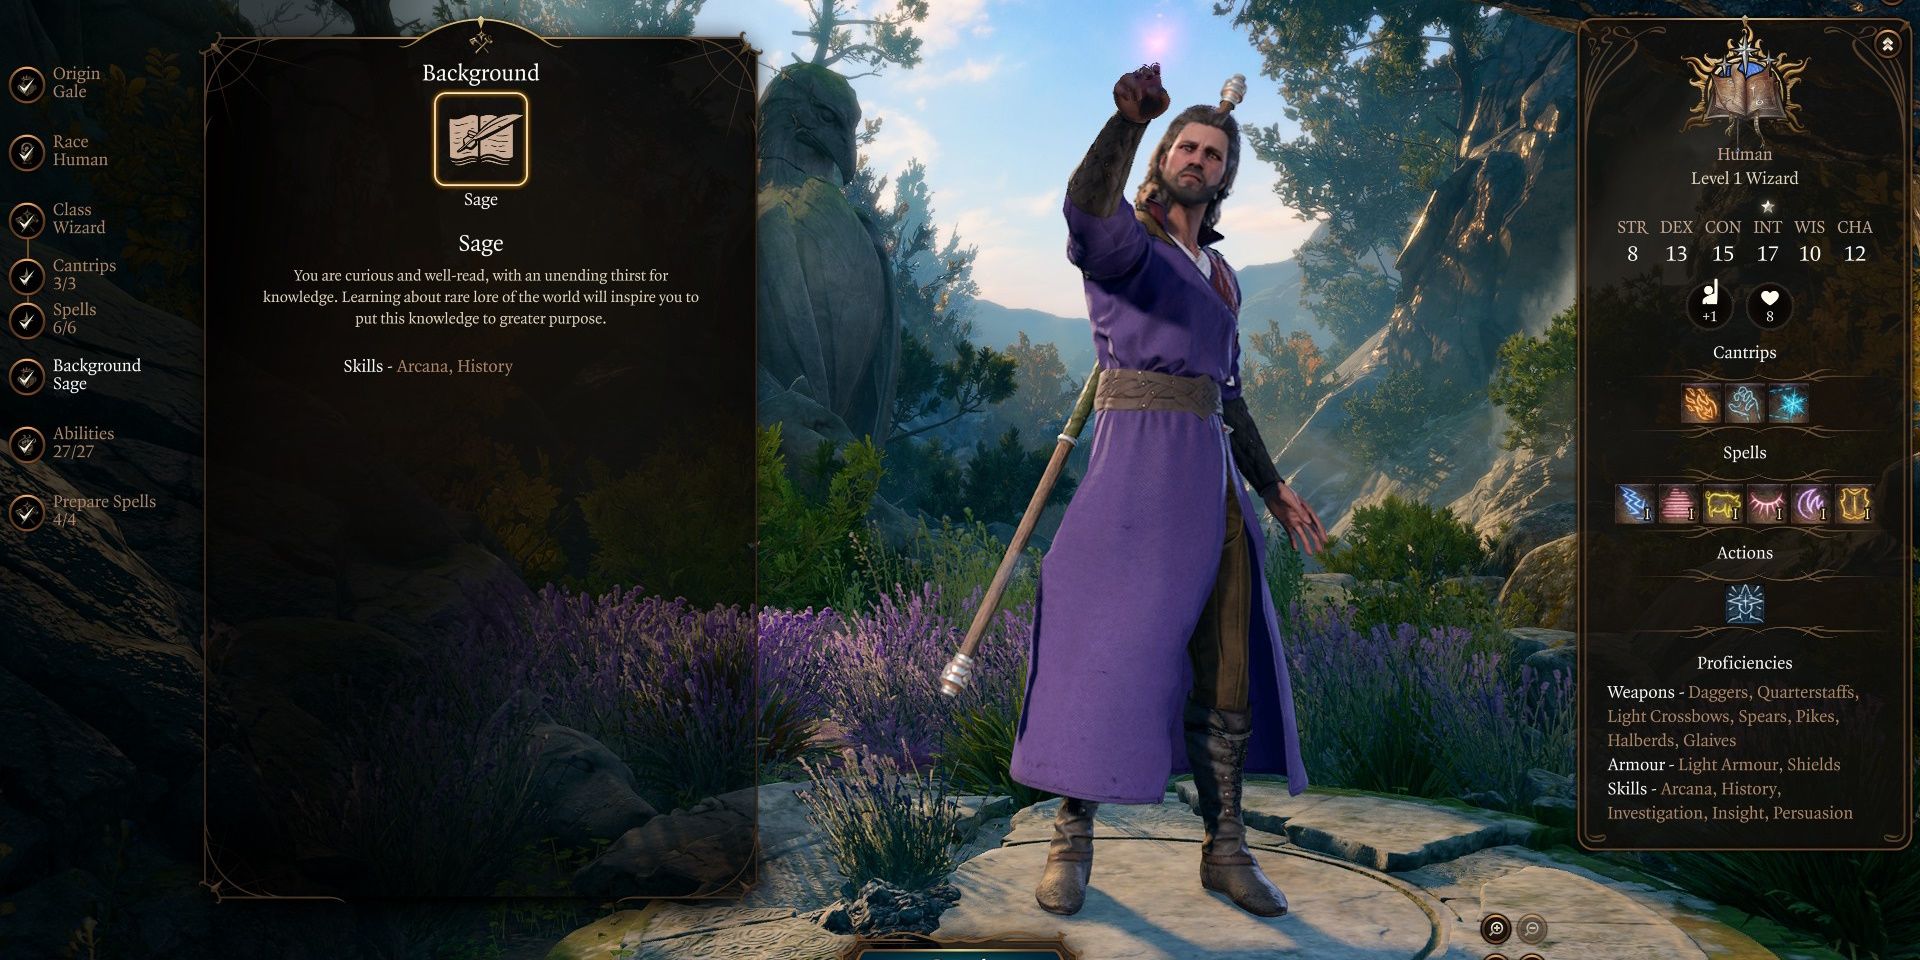 Gale's character screen as a Wizard Sage in Baldur's Gate 3